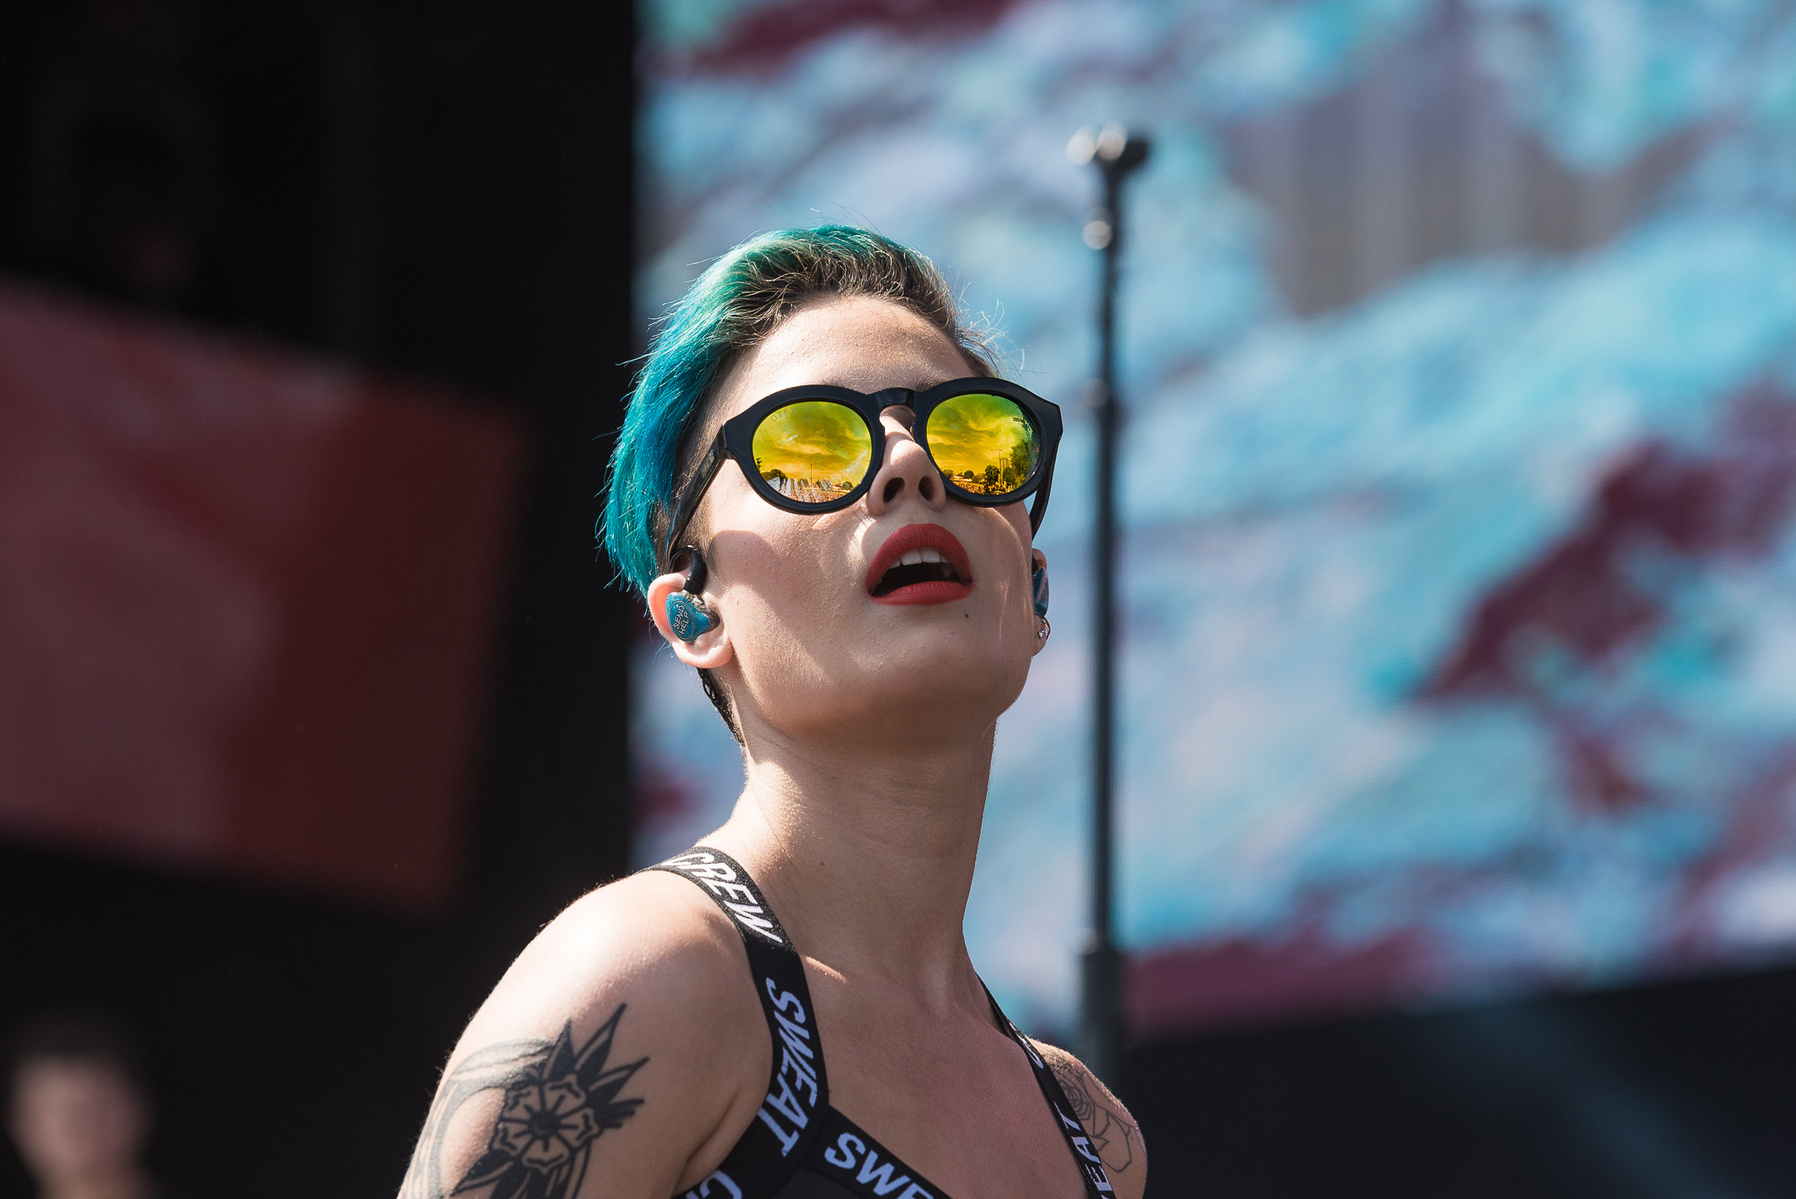 Halsey performing at Made In America Music Festival back in 2015